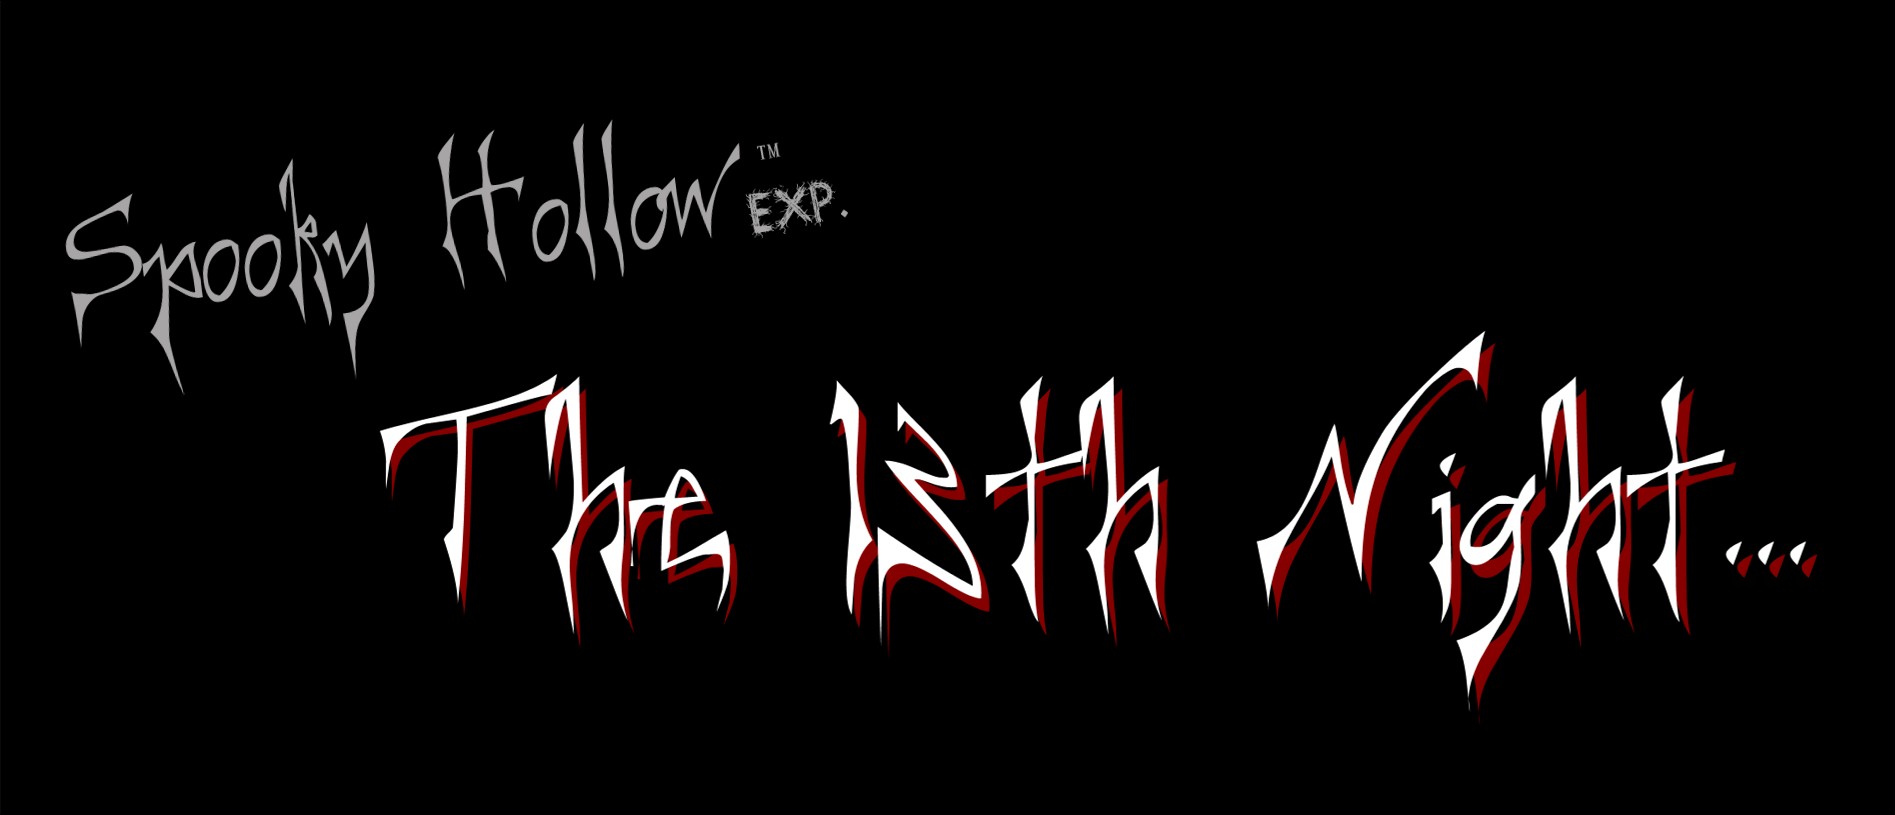 Spooky Hollow Experience 2009 title